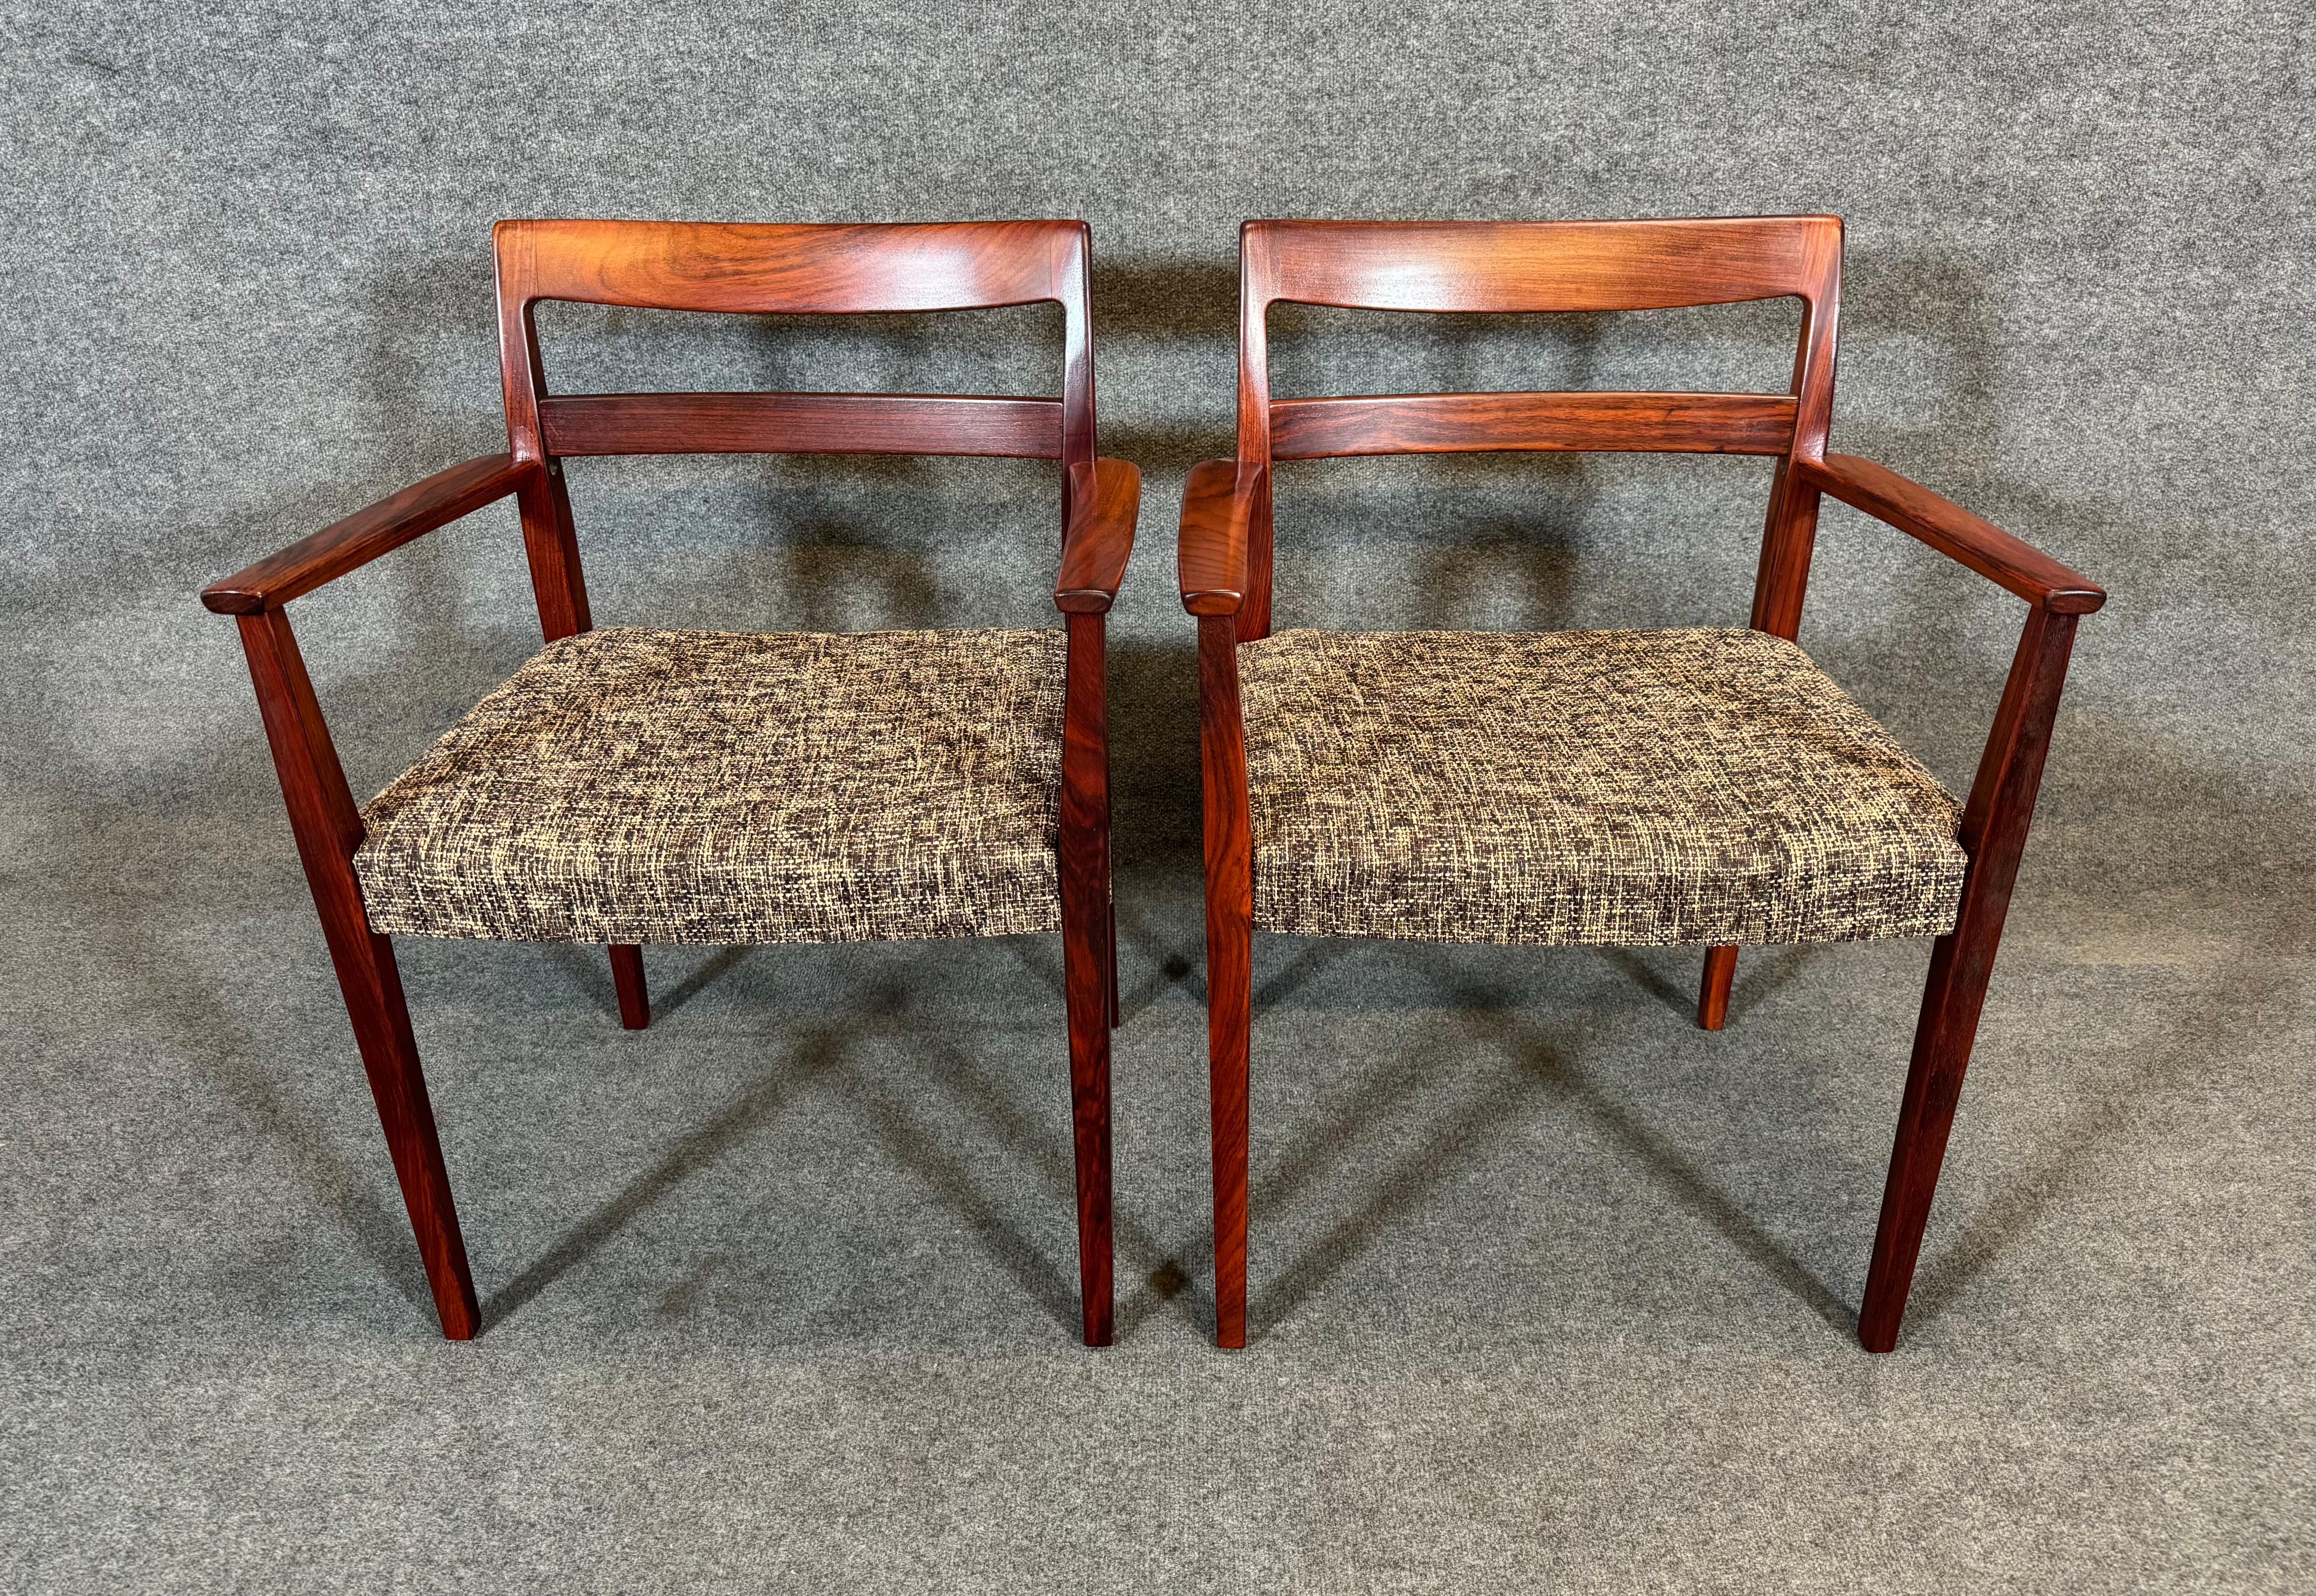 Here is a beautiful set of 8 Scandinavian modern dining chairs in rosewood model 